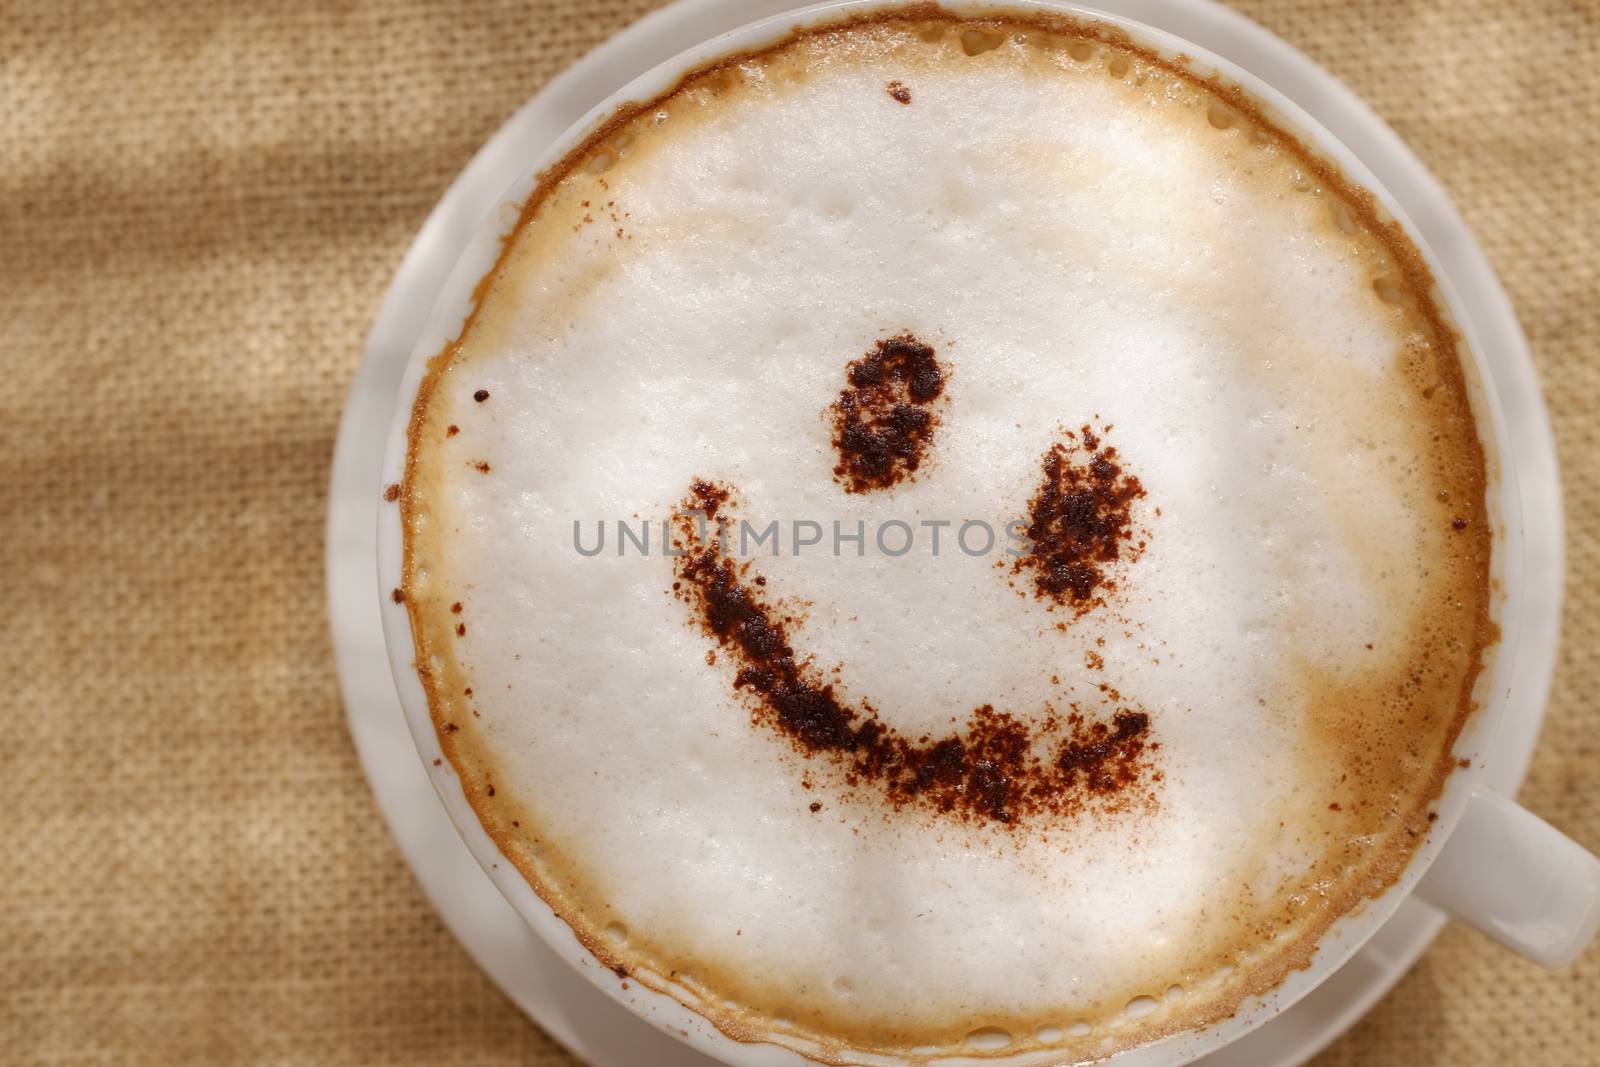 Coffee cappuccino with foam or chocolate smiling welcome happy face in restaurant or hotel